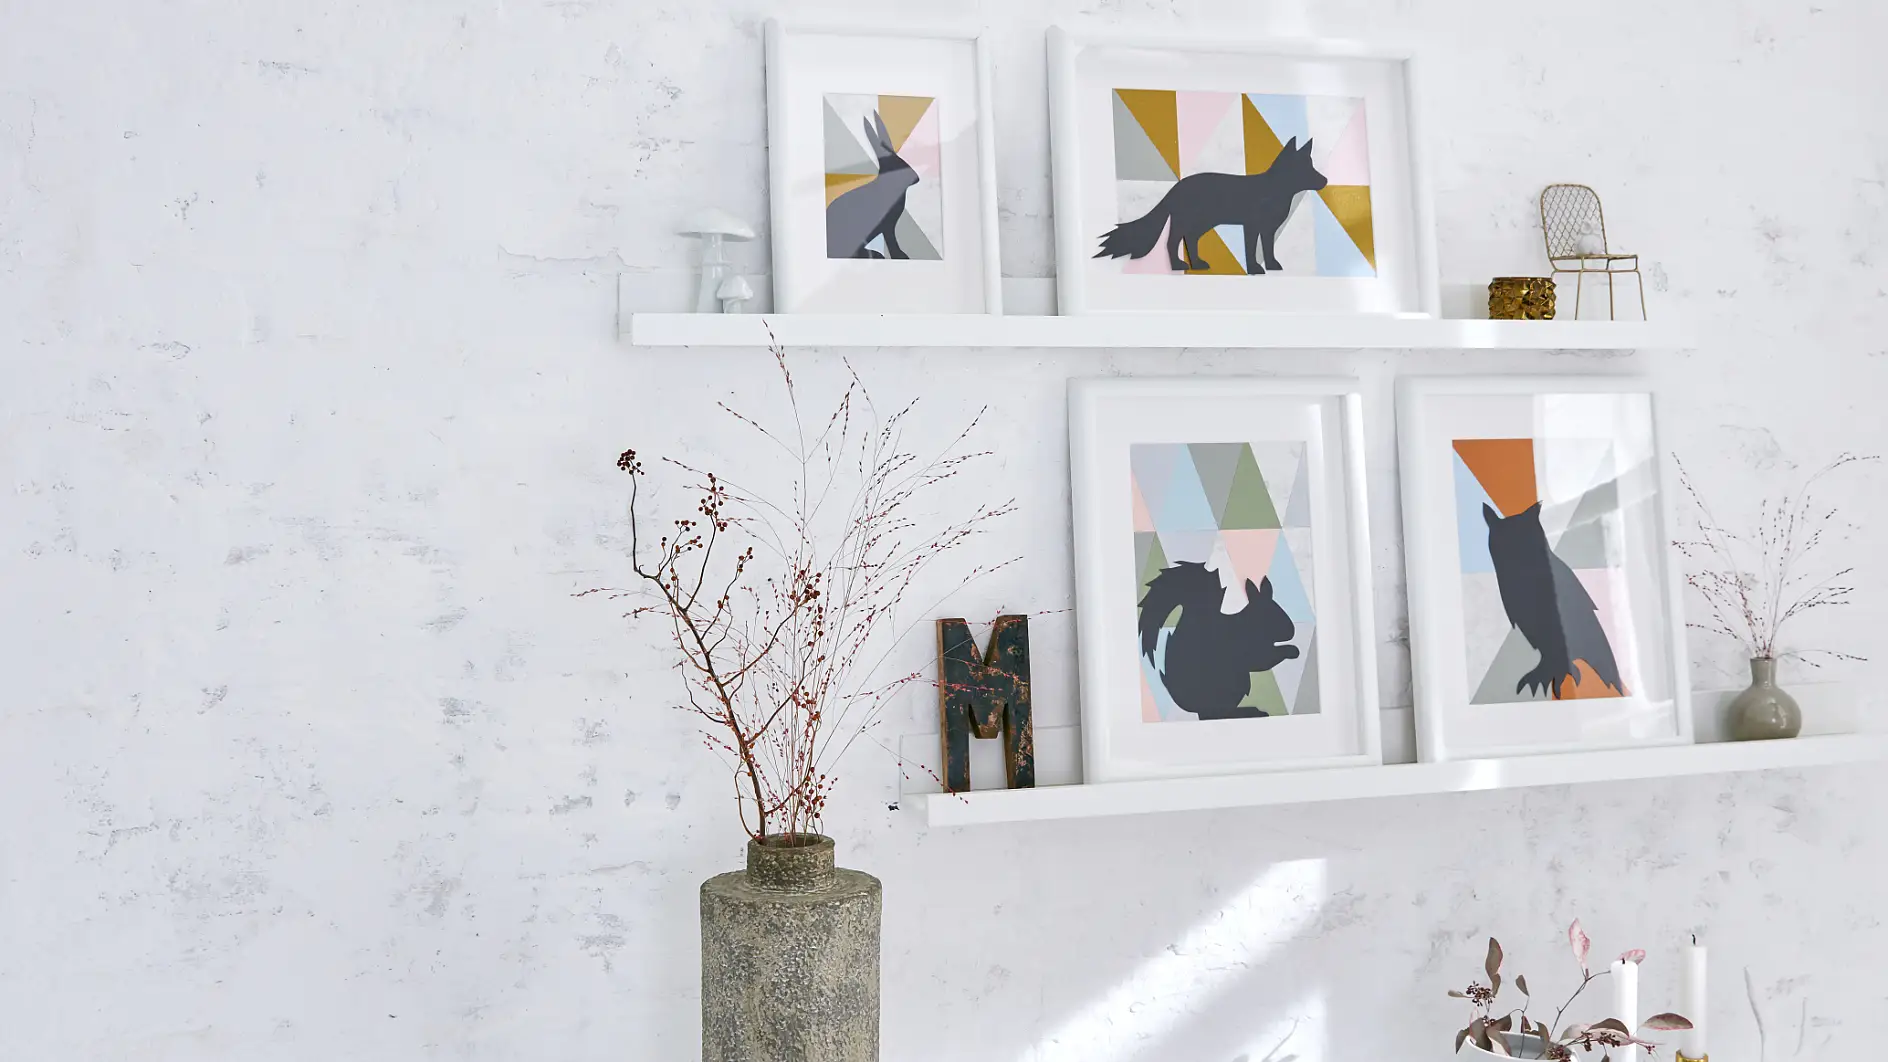 Most of the times, wild animals leave nothing more than shadows. Easier: Cut out their silhouettes, glue them to geometrically patterned surfaces, frame them and hang the pictures on the wall.